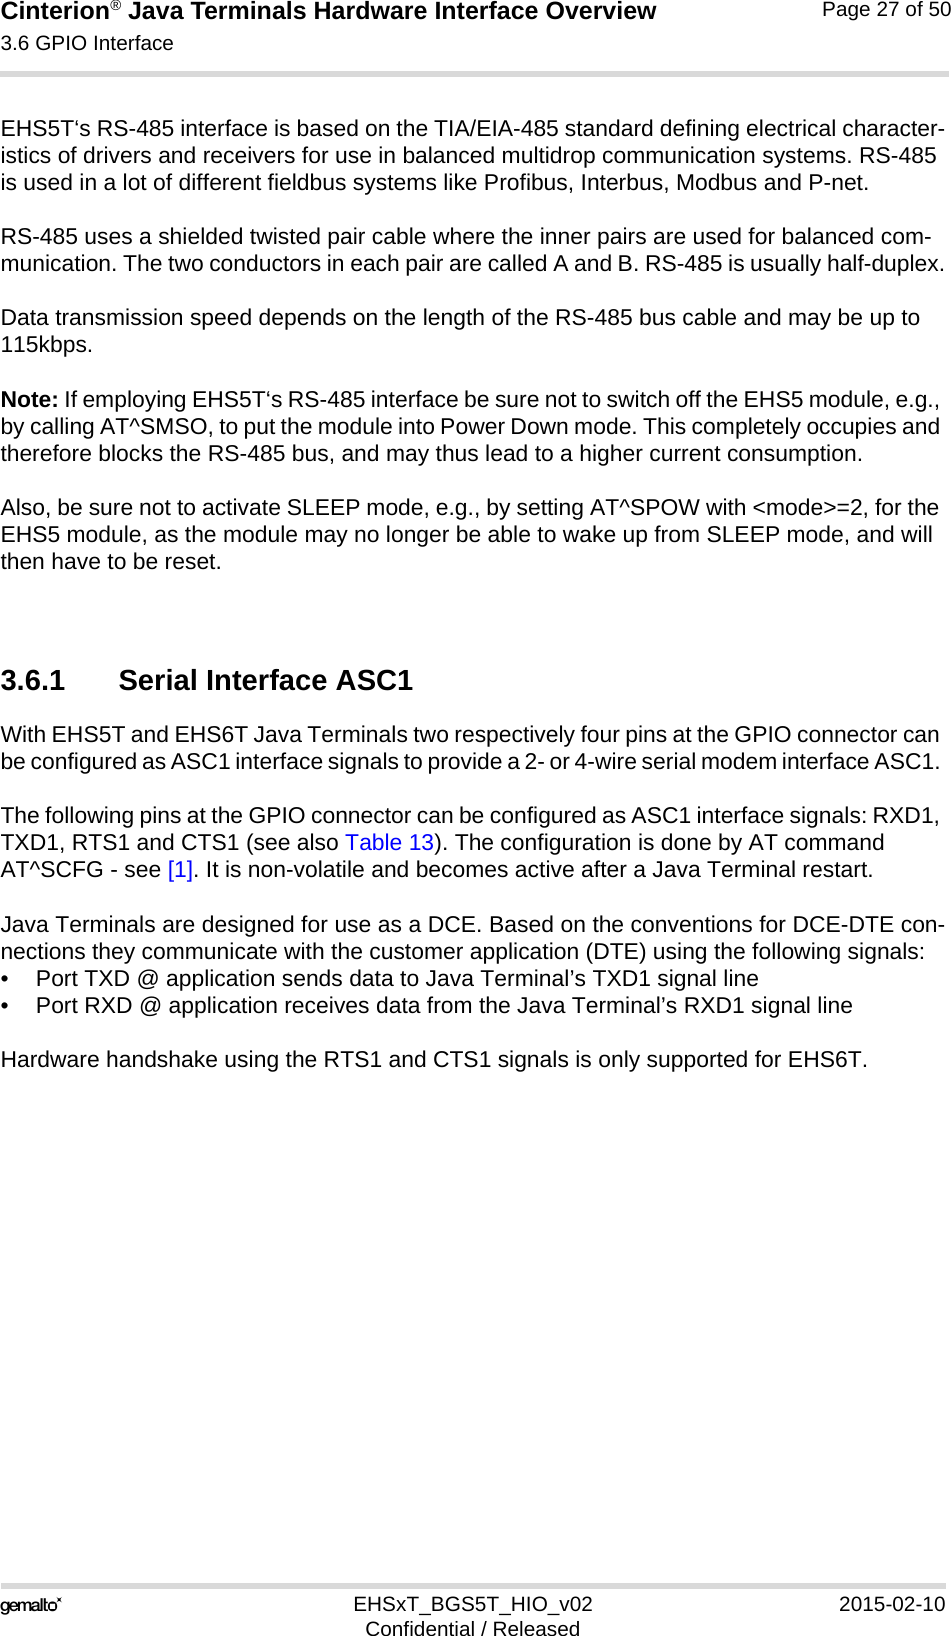 Cinterion® Java Terminals Hardware Interface Overview3.6 GPIO Interface39EHSxT_BGS5T_HIO_v02 2015-02-10Confidential / ReleasedPage 27 of 50EHS5T‘s RS-485 interface is based on the TIA/EIA-485 standard defining electrical character-istics of drivers and receivers for use in balanced multidrop communication systems. RS-485 is used in a lot of different fieldbus systems like Profibus, Interbus, Modbus and P-net.RS-485 uses a shielded twisted pair cable where the inner pairs are used for balanced com-munication. The two conductors in each pair are called A and B. RS-485 is usually half-duplex.Data transmission speed depends on the length of the RS-485 bus cable and may be up to 115kbps.Note: If employing EHS5T‘s RS-485 interface be sure not to switch off the EHS5 module, e.g., by calling AT^SMSO, to put the module into Power Down mode. This completely occupies and therefore blocks the RS-485 bus, and may thus lead to a higher current consumption. Also, be sure not to activate SLEEP mode, e.g., by setting AT^SPOW with &lt;mode&gt;=2, for the EHS5 module, as the module may no longer be able to wake up from SLEEP mode, and will then have to be reset. 3.6.1 Serial Interface ASC1With EHS5T and EHS6T Java Terminals two respectively four pins at the GPIO connector can be configured as ASC1 interface signals to provide a 2- or 4-wire serial modem interface ASC1. The following pins at the GPIO connector can be configured as ASC1 interface signals: RXD1, TXD1, RTS1 and CTS1 (see also Table 13). The configuration is done by AT command AT^SCFG - see [1]. It is non-volatile and becomes active after a Java Terminal restart.Java Terminals are designed for use as a DCE. Based on the conventions for DCE-DTE con-nections they communicate with the customer application (DTE) using the following signals:• Port TXD @ application sends data to Java Terminal’s TXD1 signal line• Port RXD @ application receives data from the Java Terminal’s RXD1 signal lineHardware handshake using the RTS1 and CTS1 signals is only supported for EHS6T.